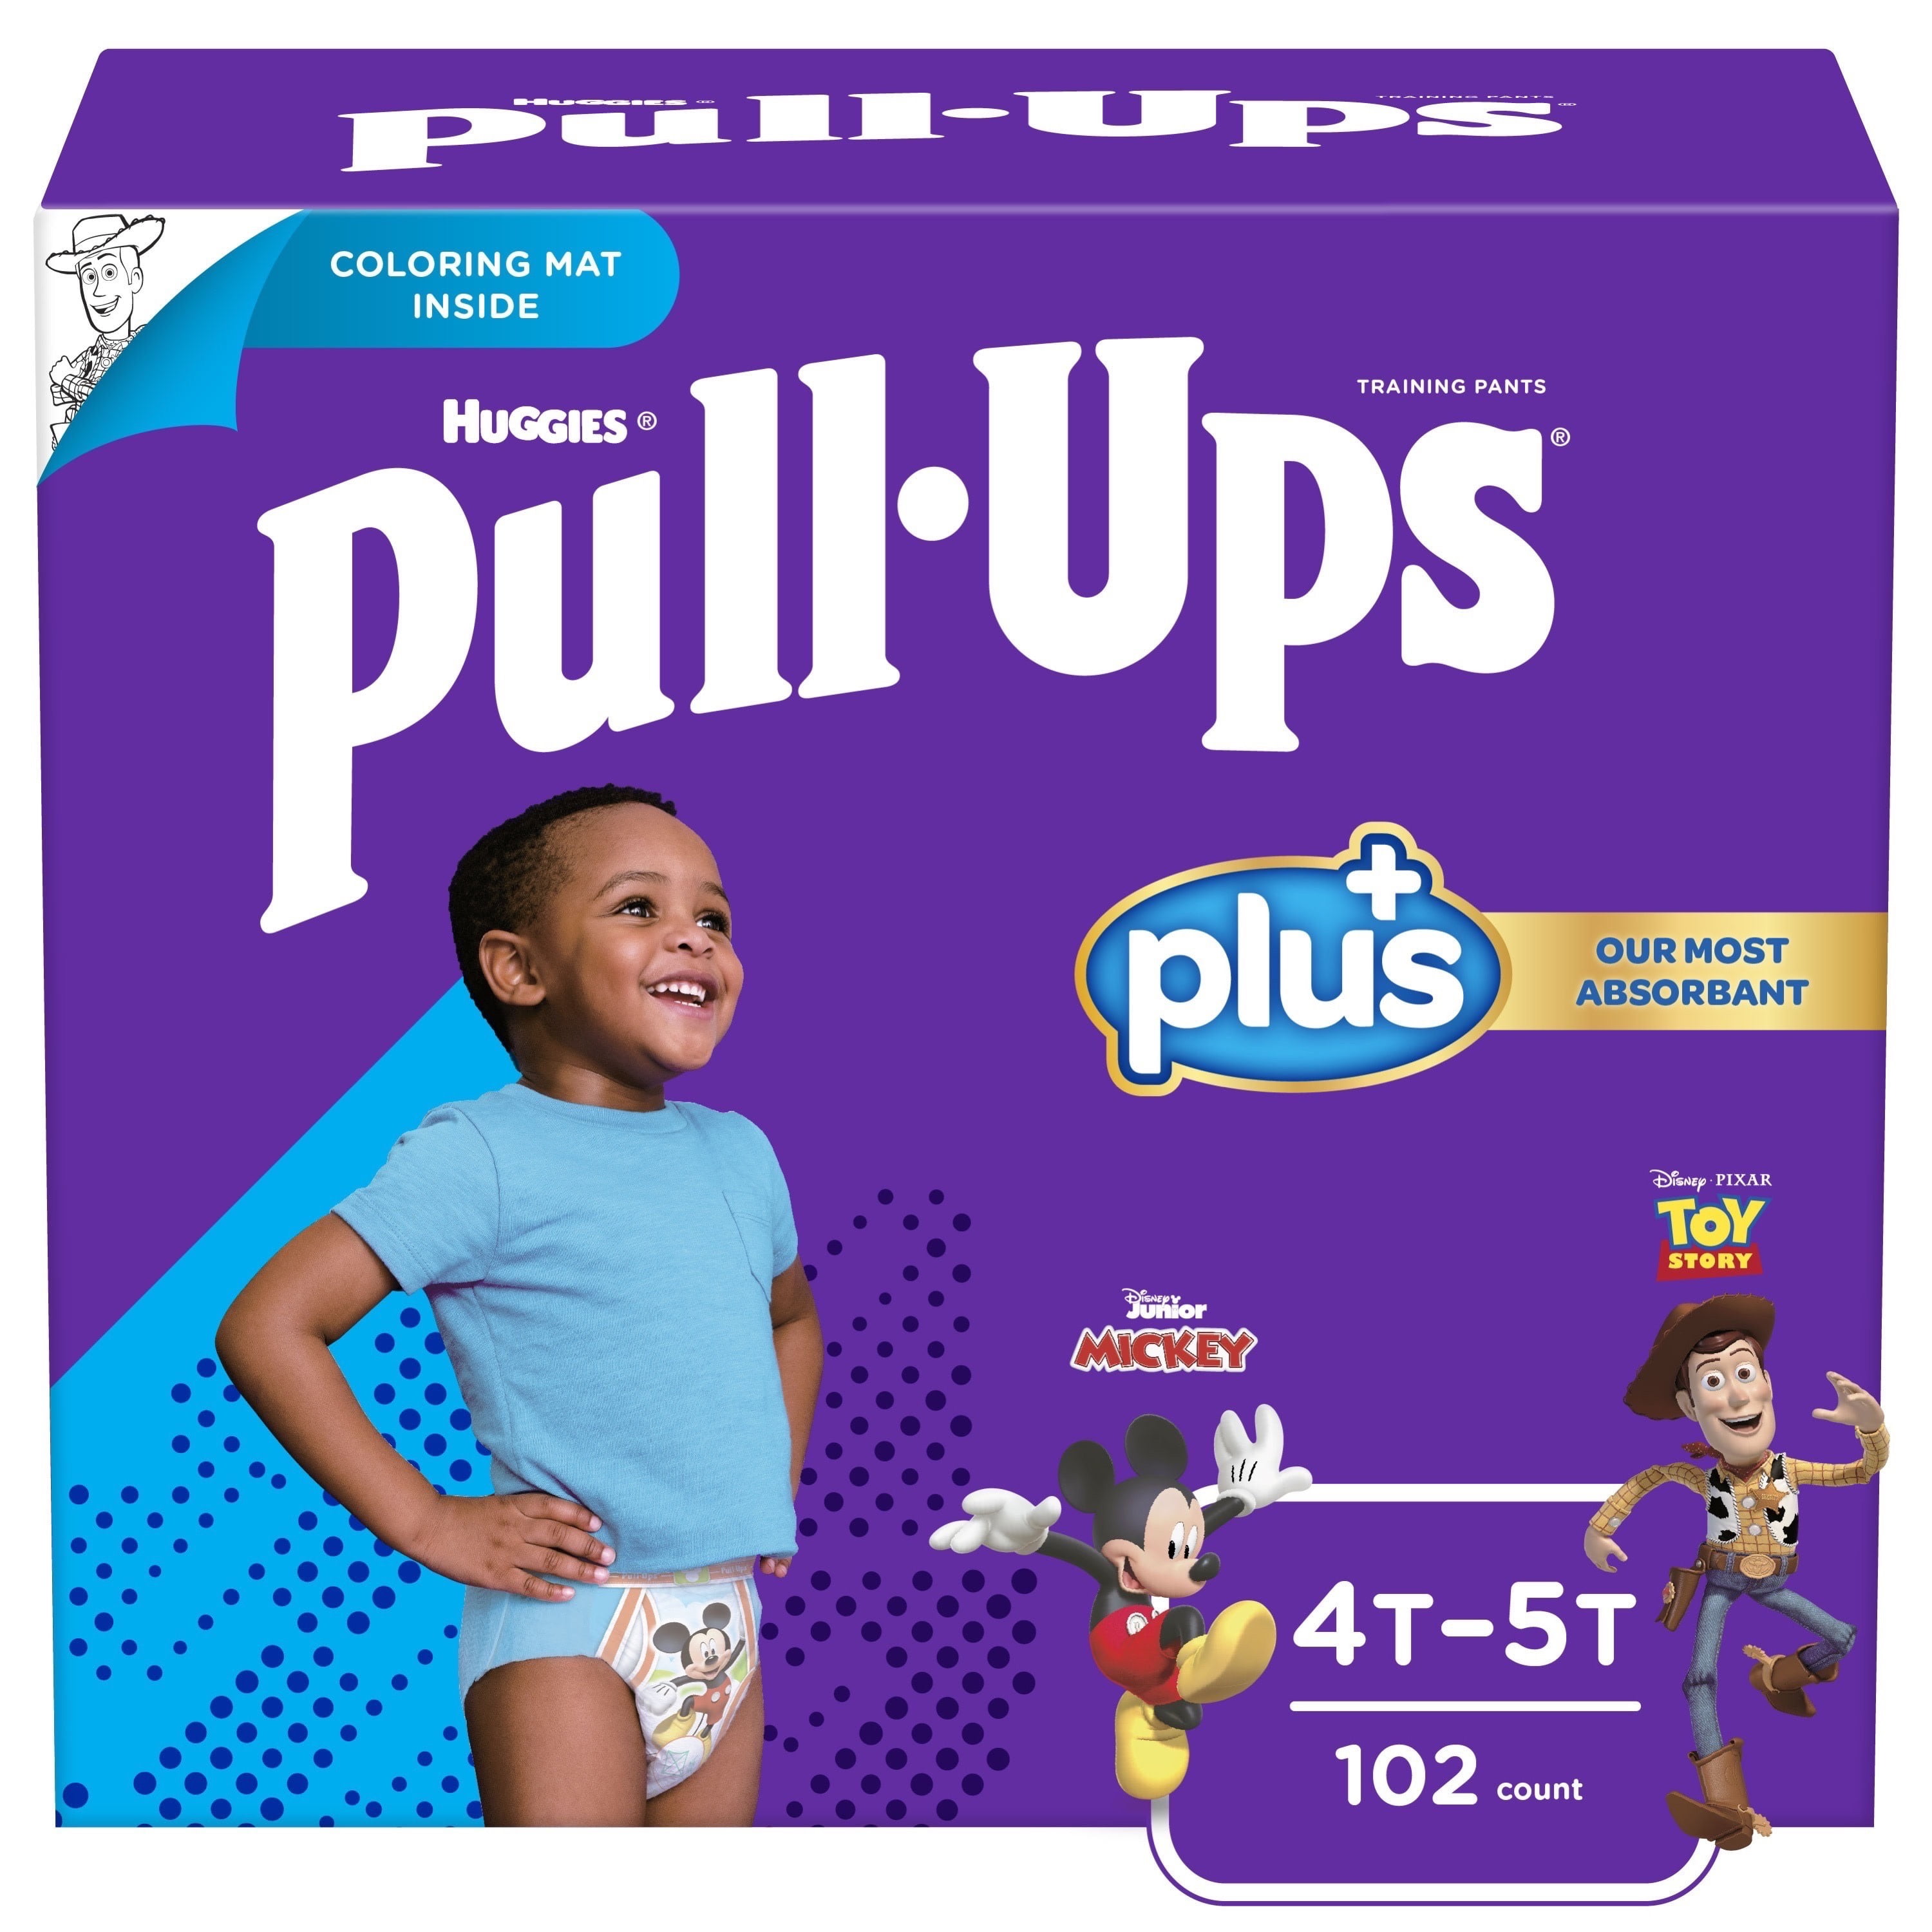 Huggies Pull-Ups Plus Training Pants for Boys 4T-5T 102 count